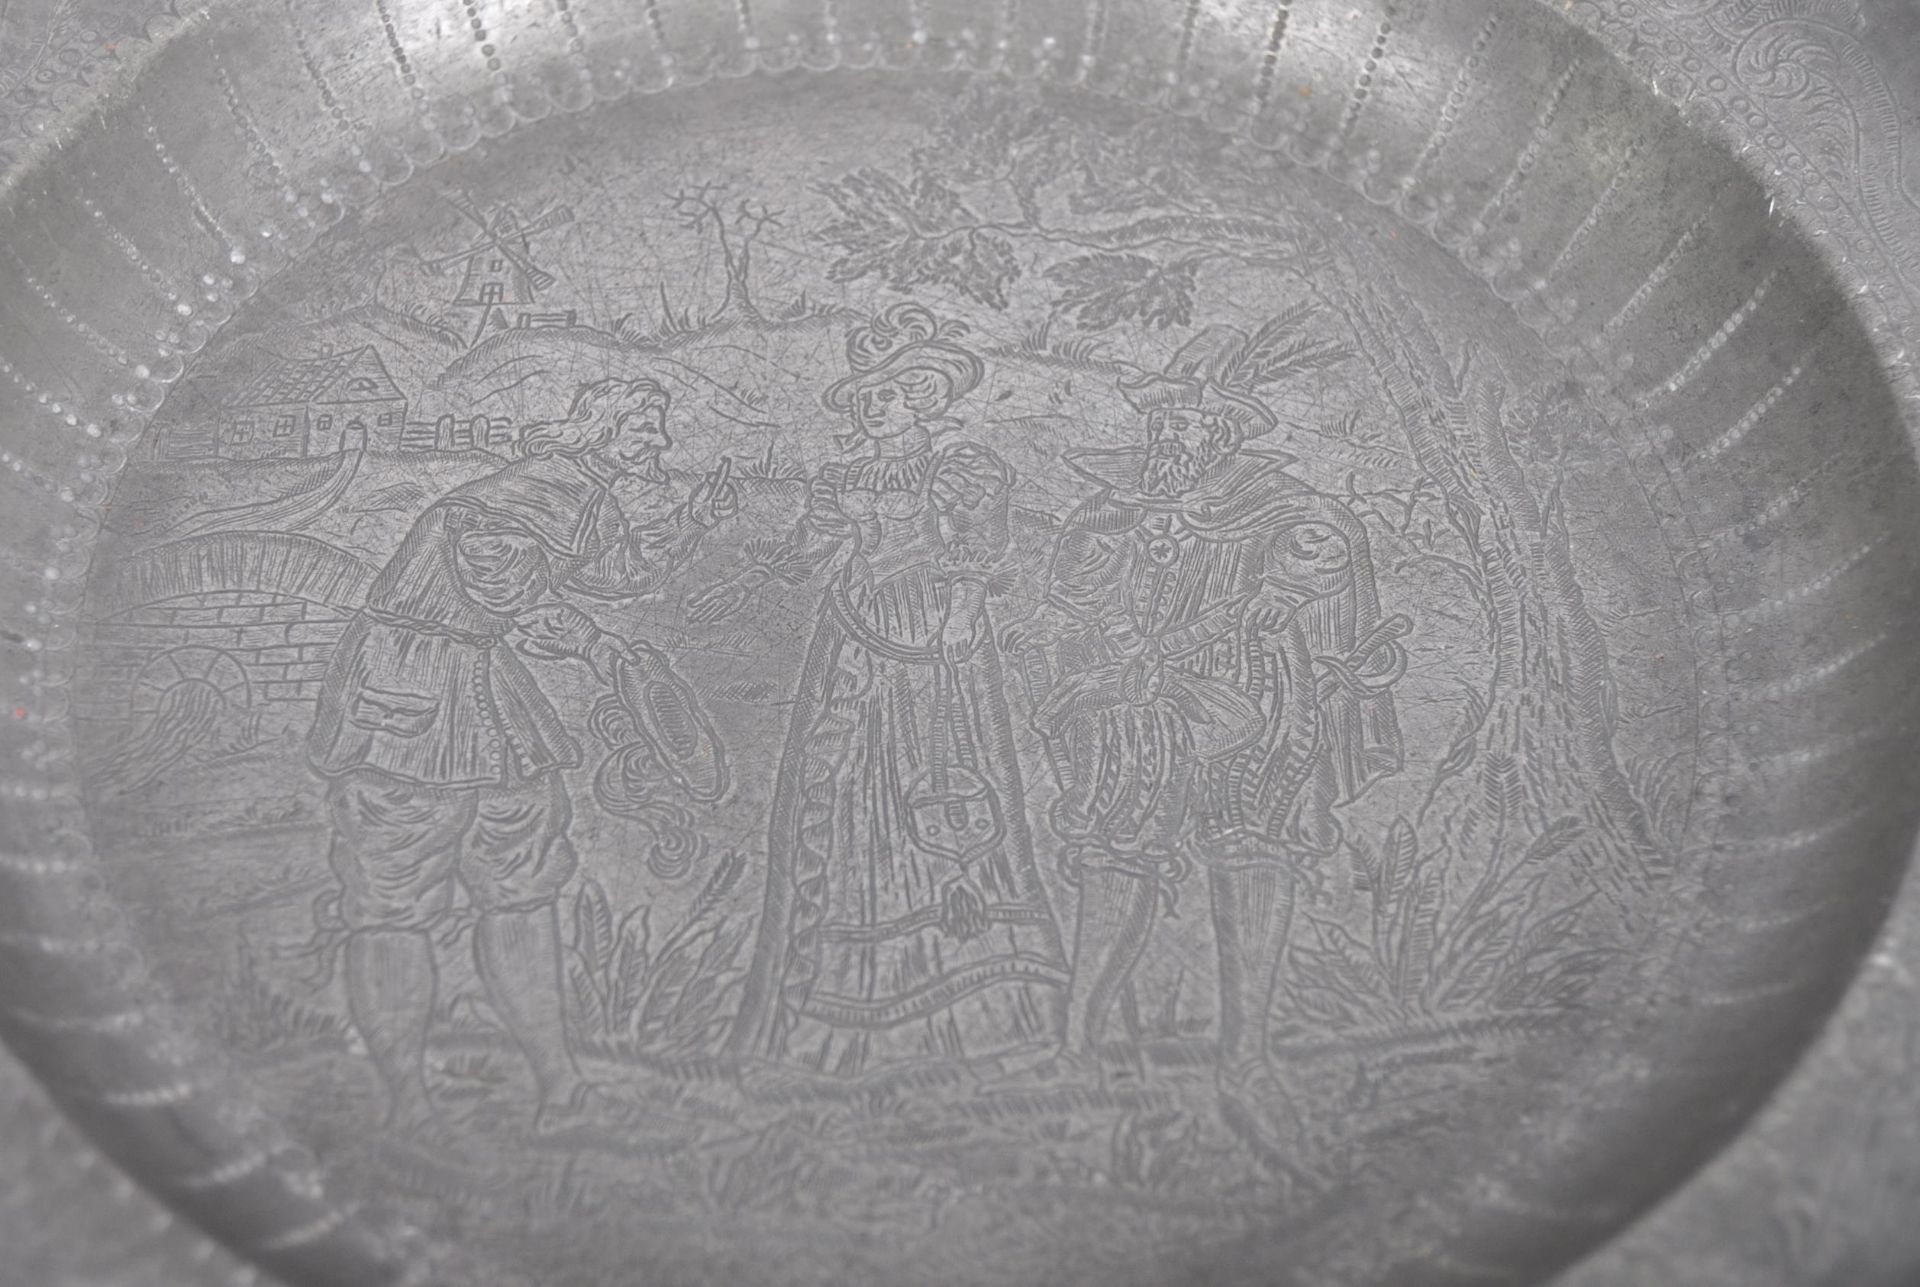 PAIR 18TH CENTURY DUTCH ENGRAVED PEWTER PLATES - Image 4 of 6